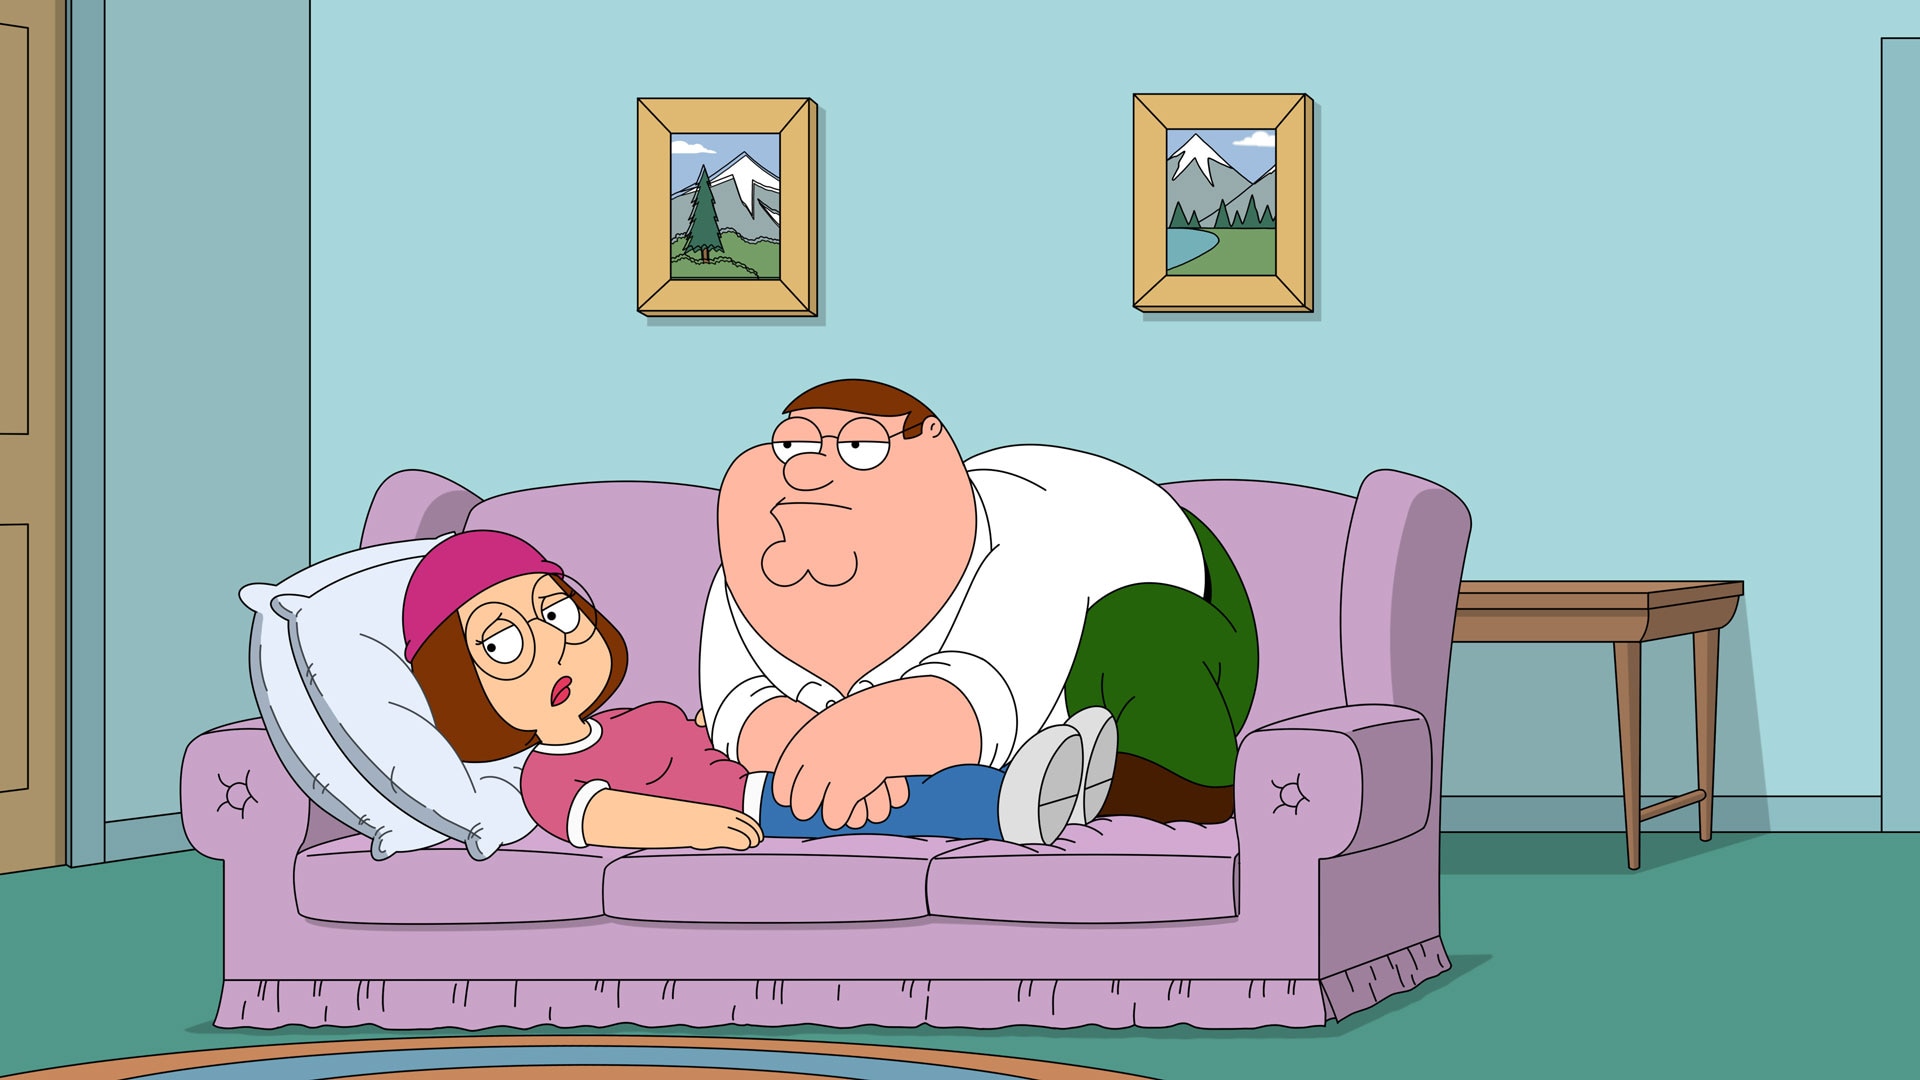 Jawsh on X: peter: hey lois remember that one time i shot our daugeter meg  griffin lois griffin: grocery  / X